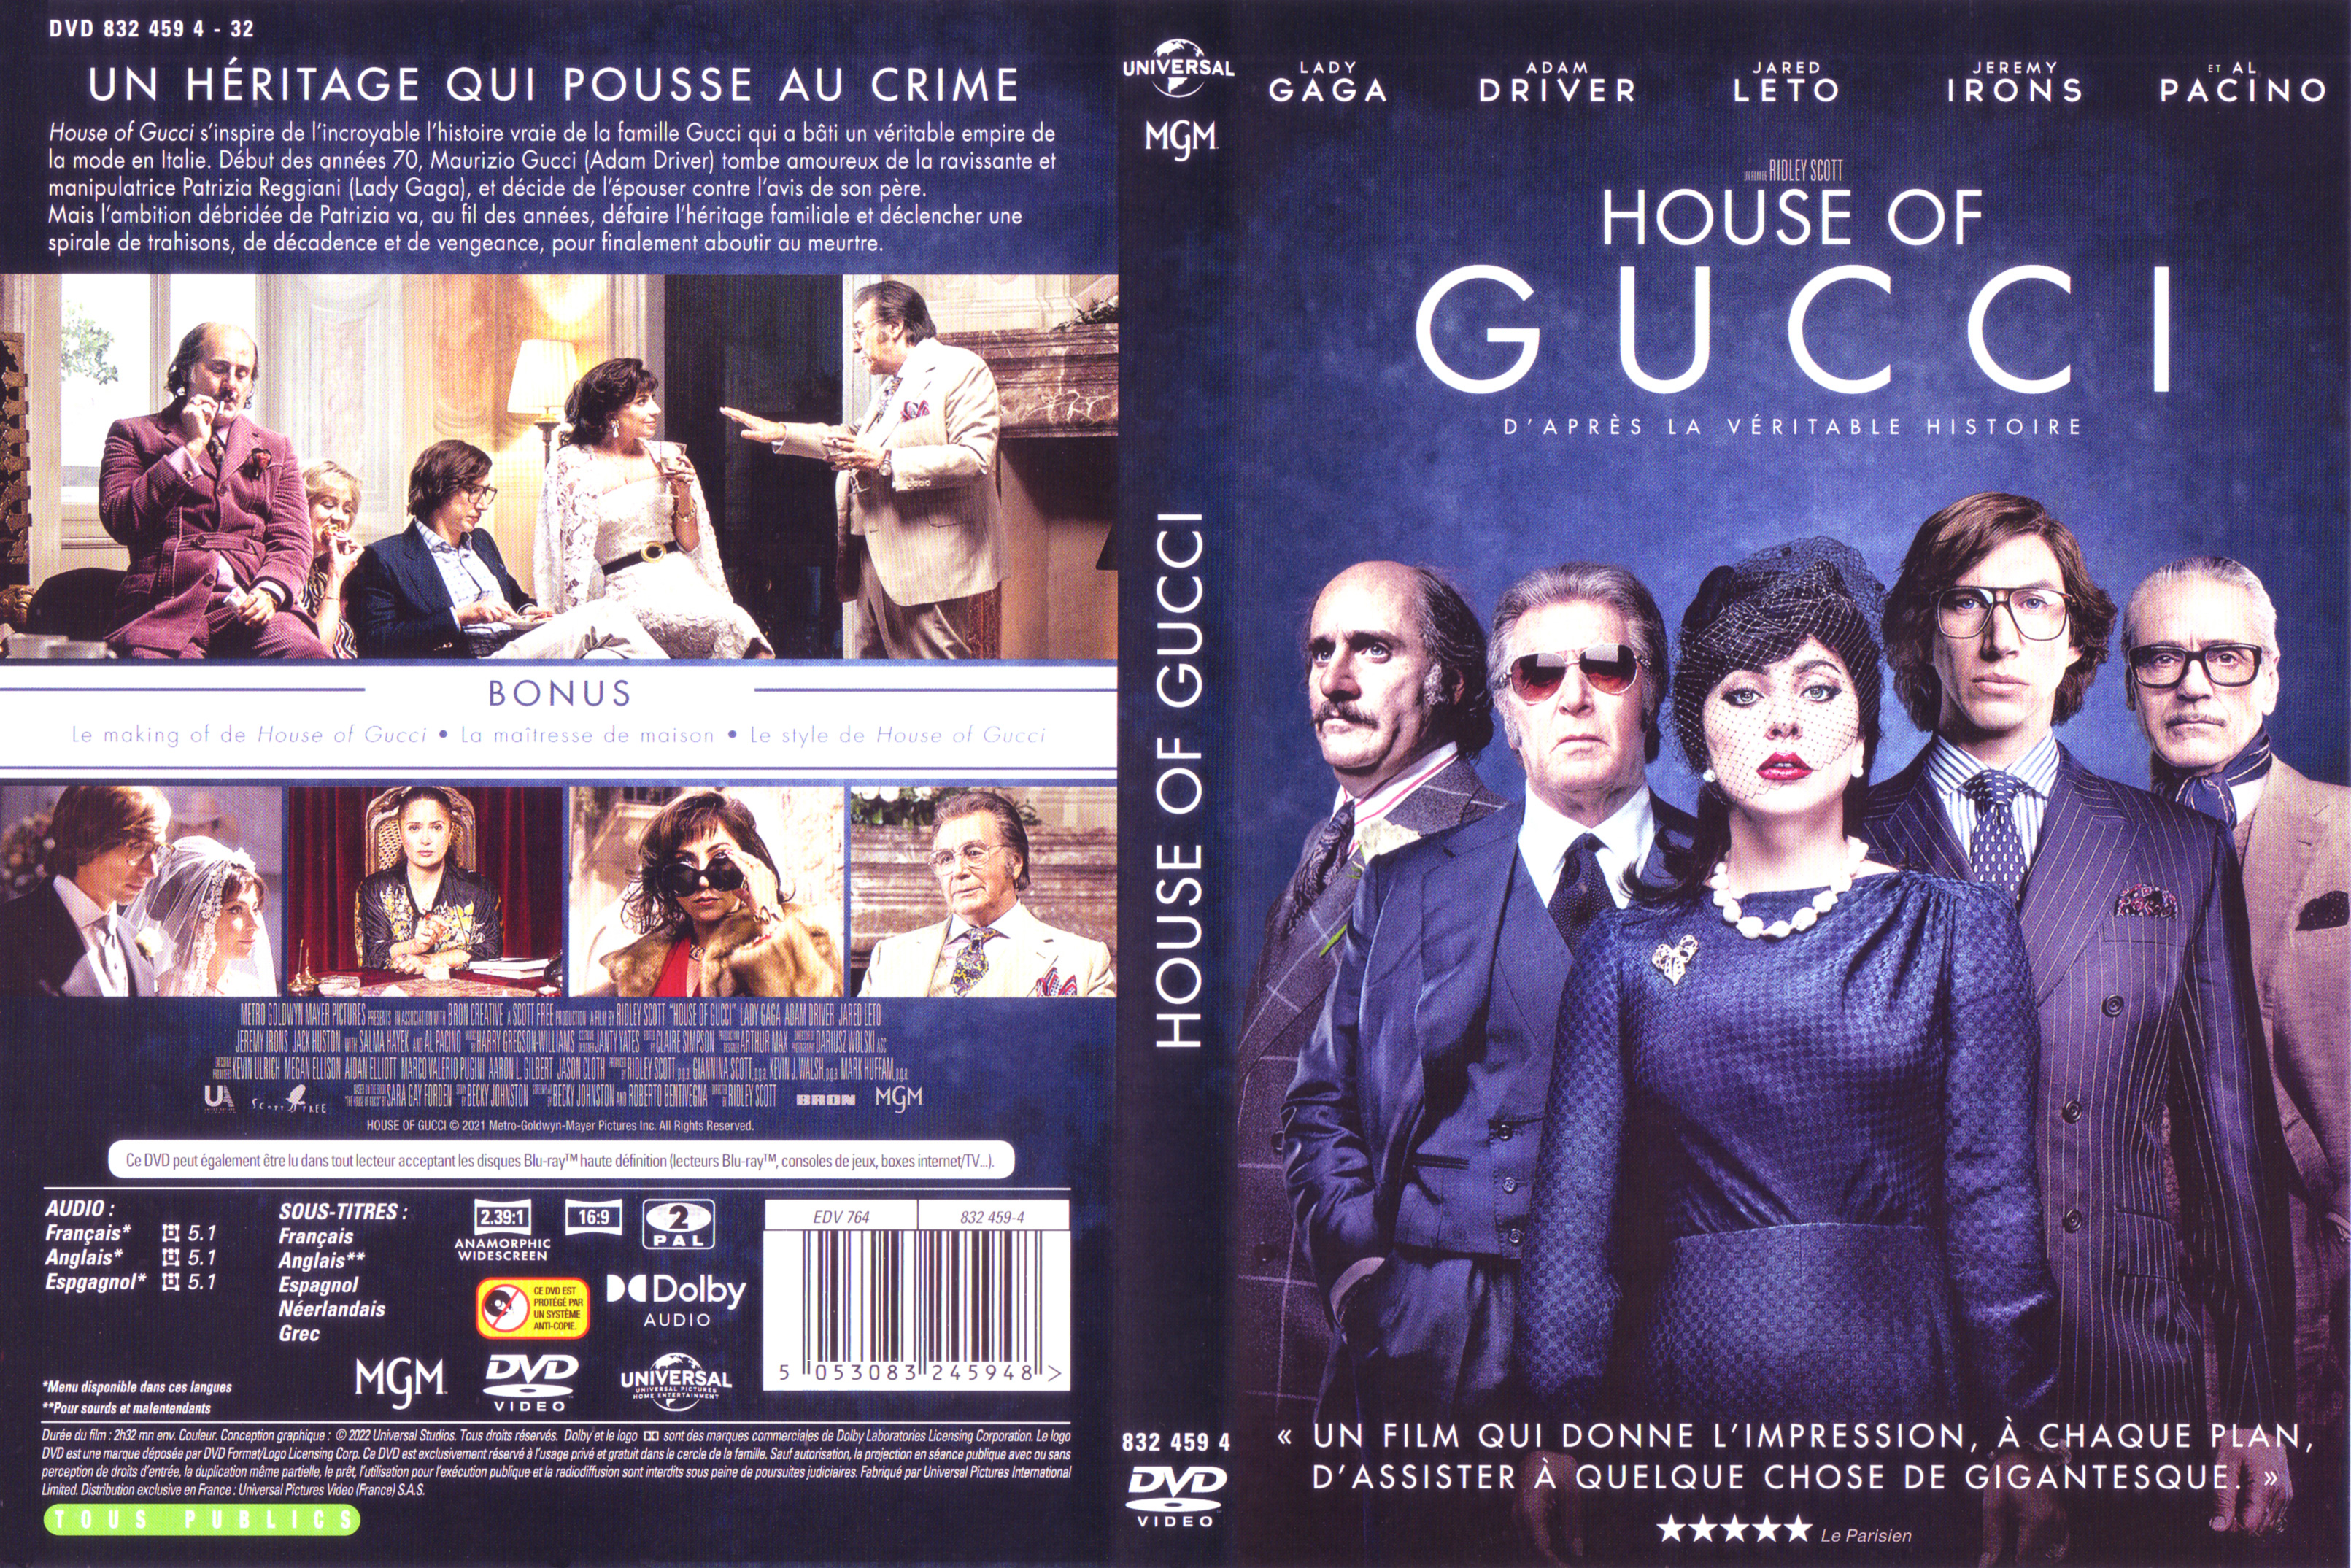 Jaquette DVD House of Gucci